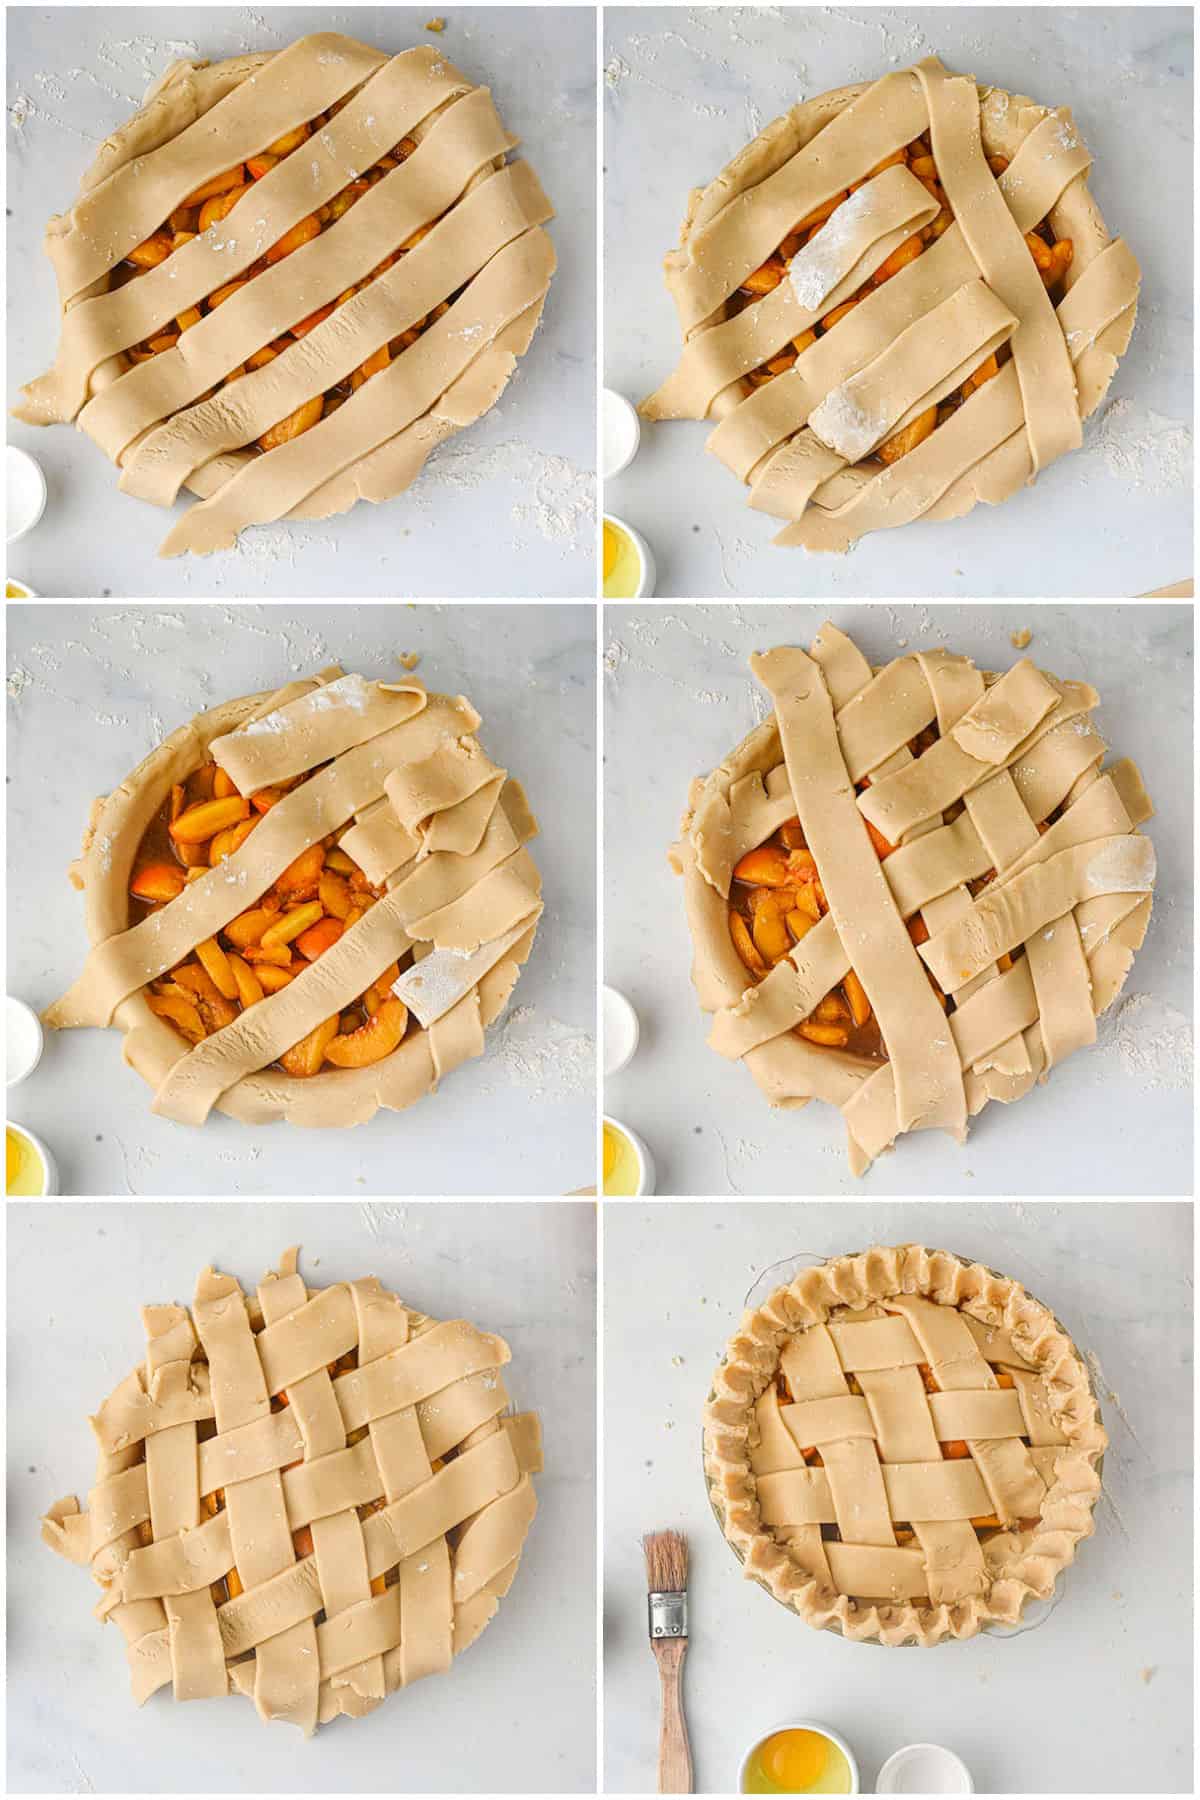 A collage of photos showing the steps to weave the lattice crust on top of the peach pie.